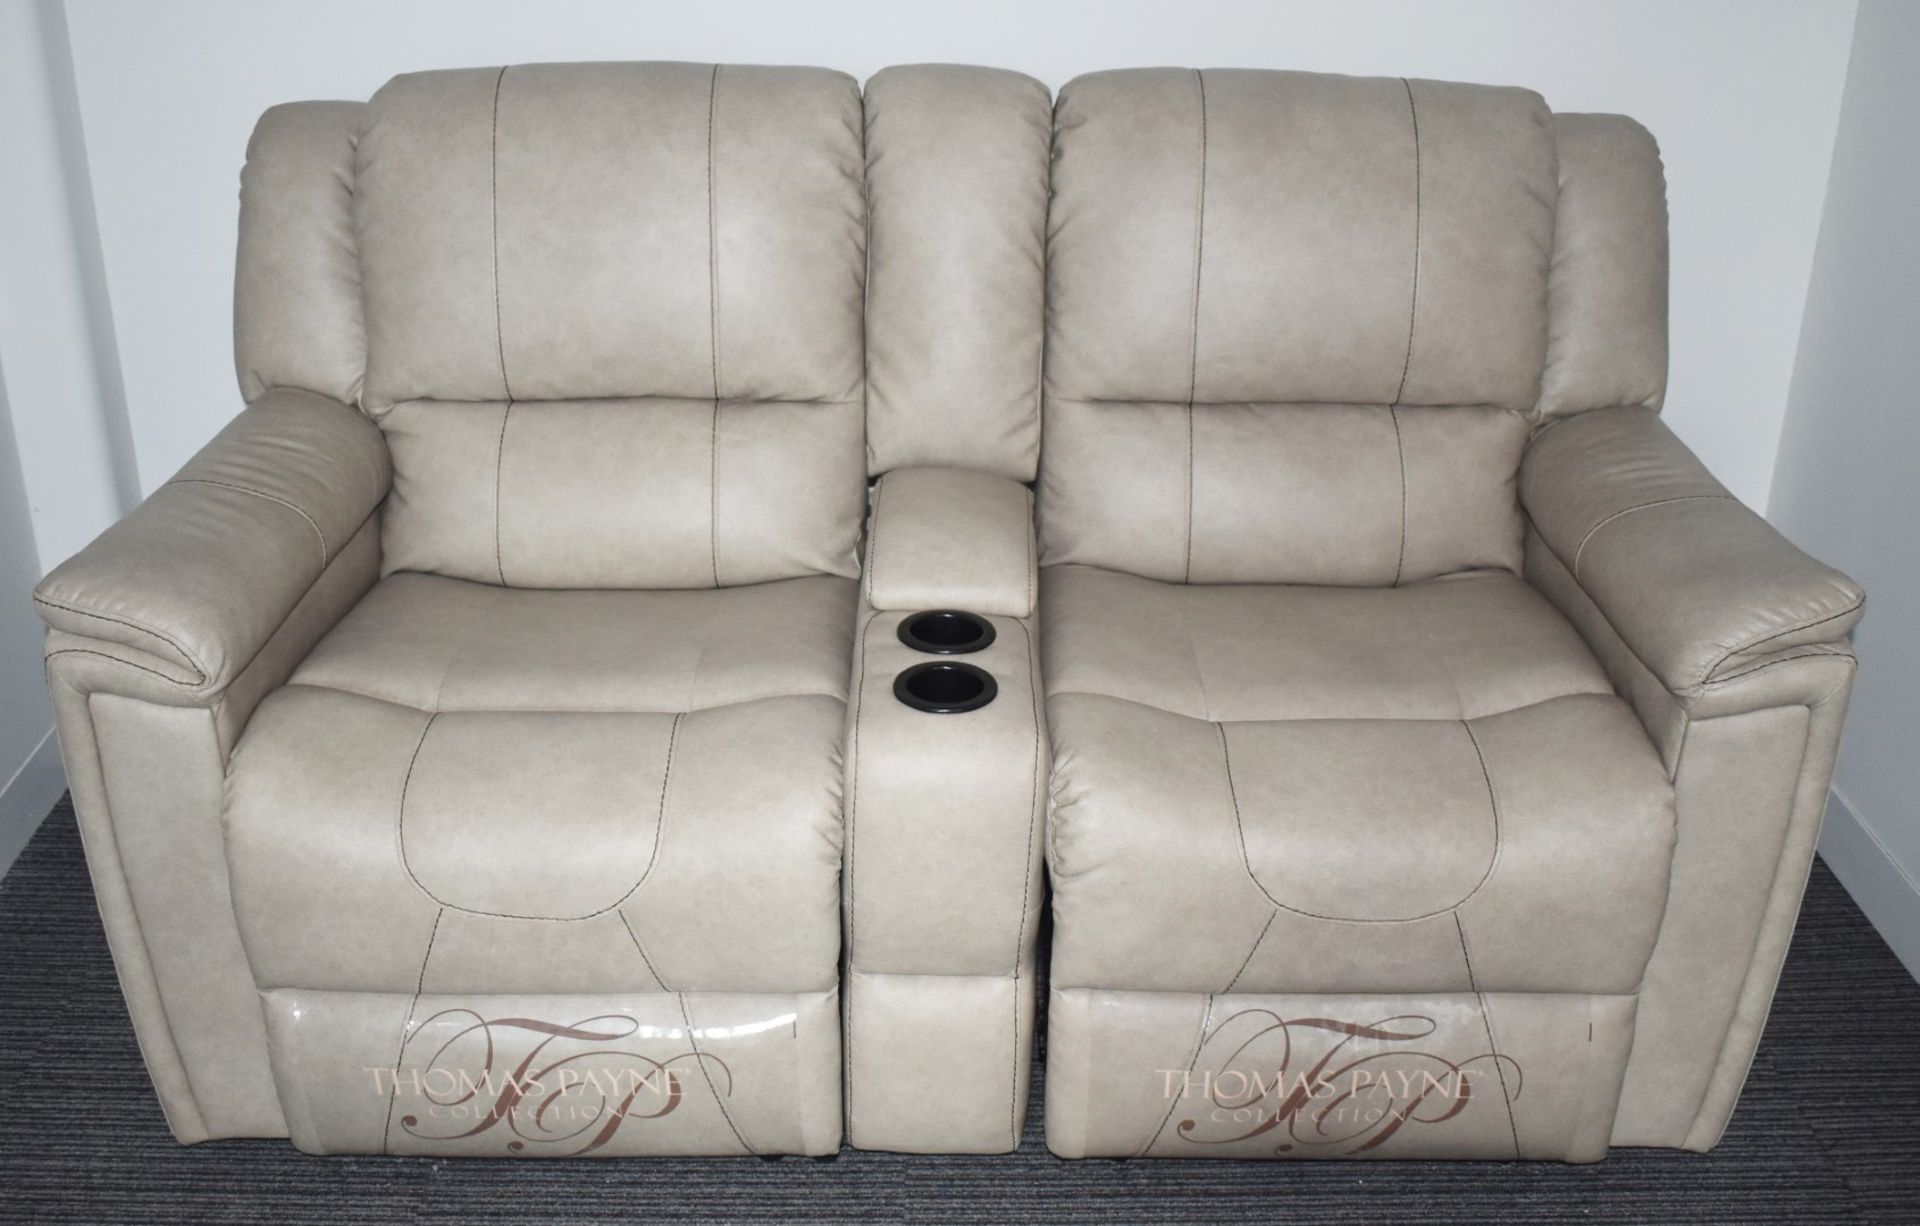 2 x Thomas Payne Reclining Wallhugger Theater Seating Love Seat Couches With Center Consoles and - Image 13 of 13